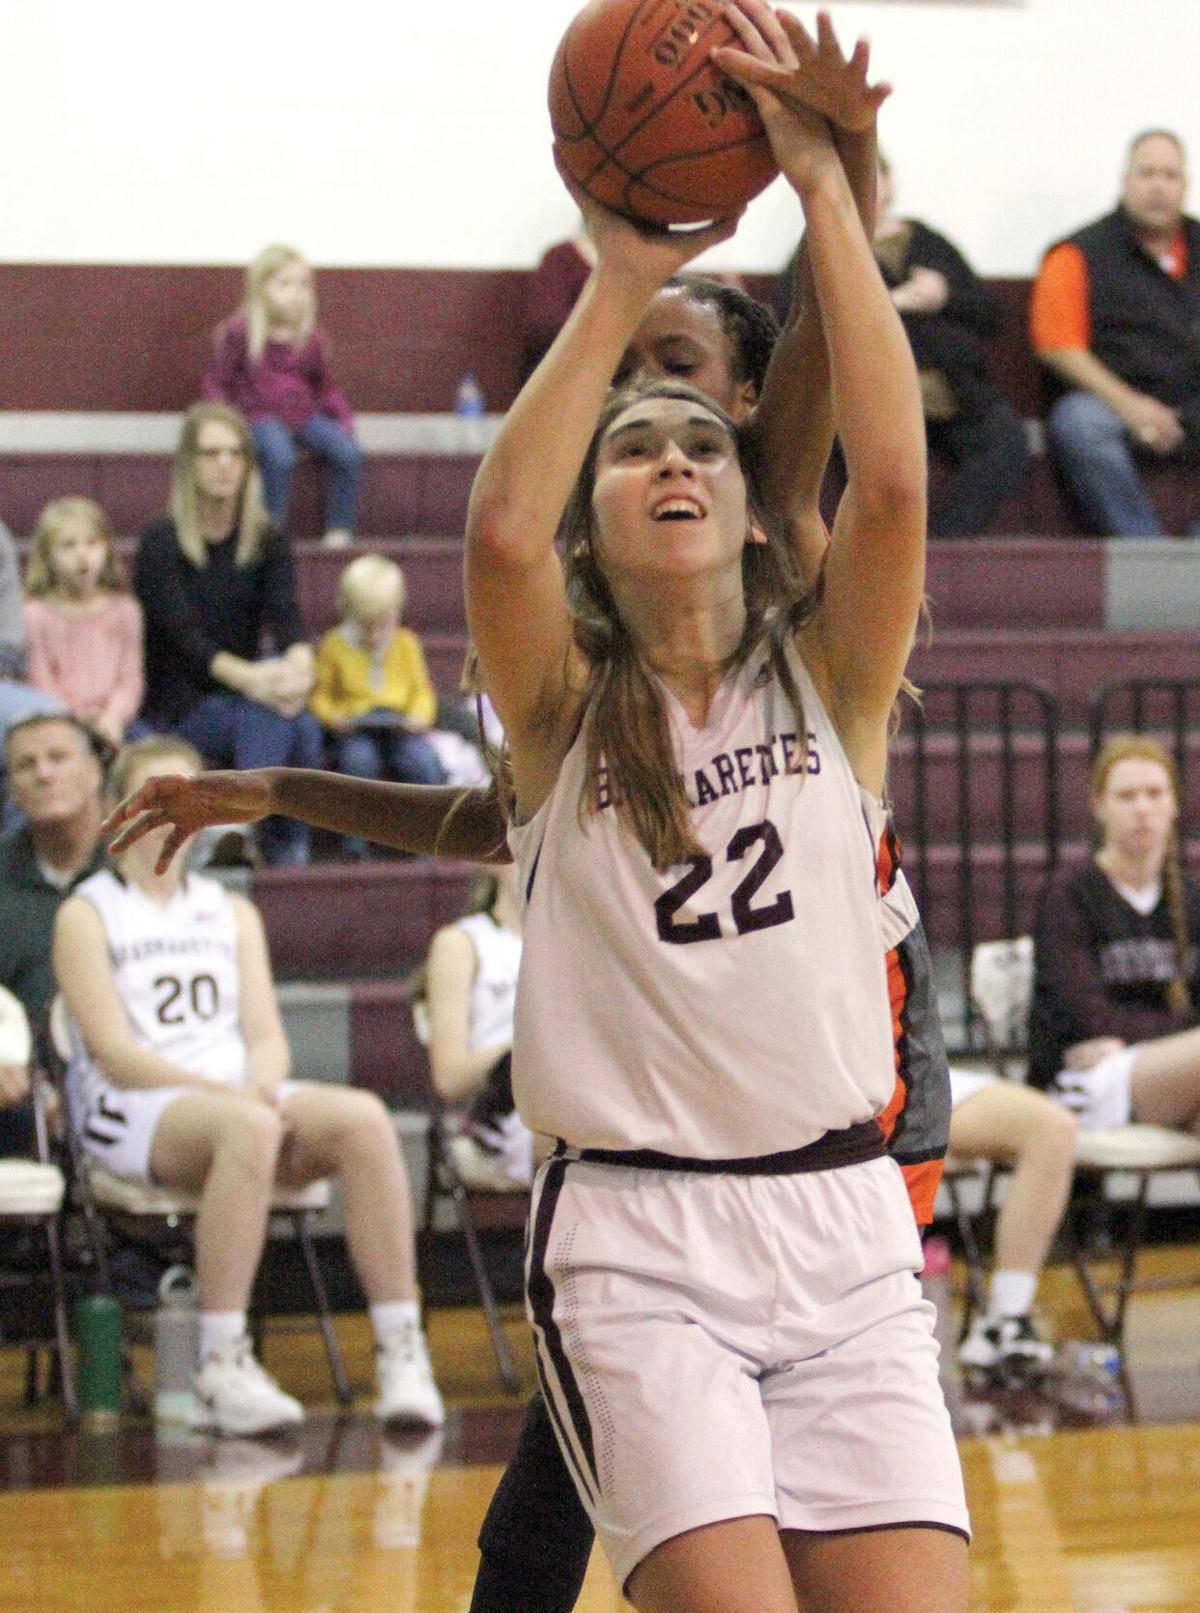 Brahmarettes hold on for hoops victory